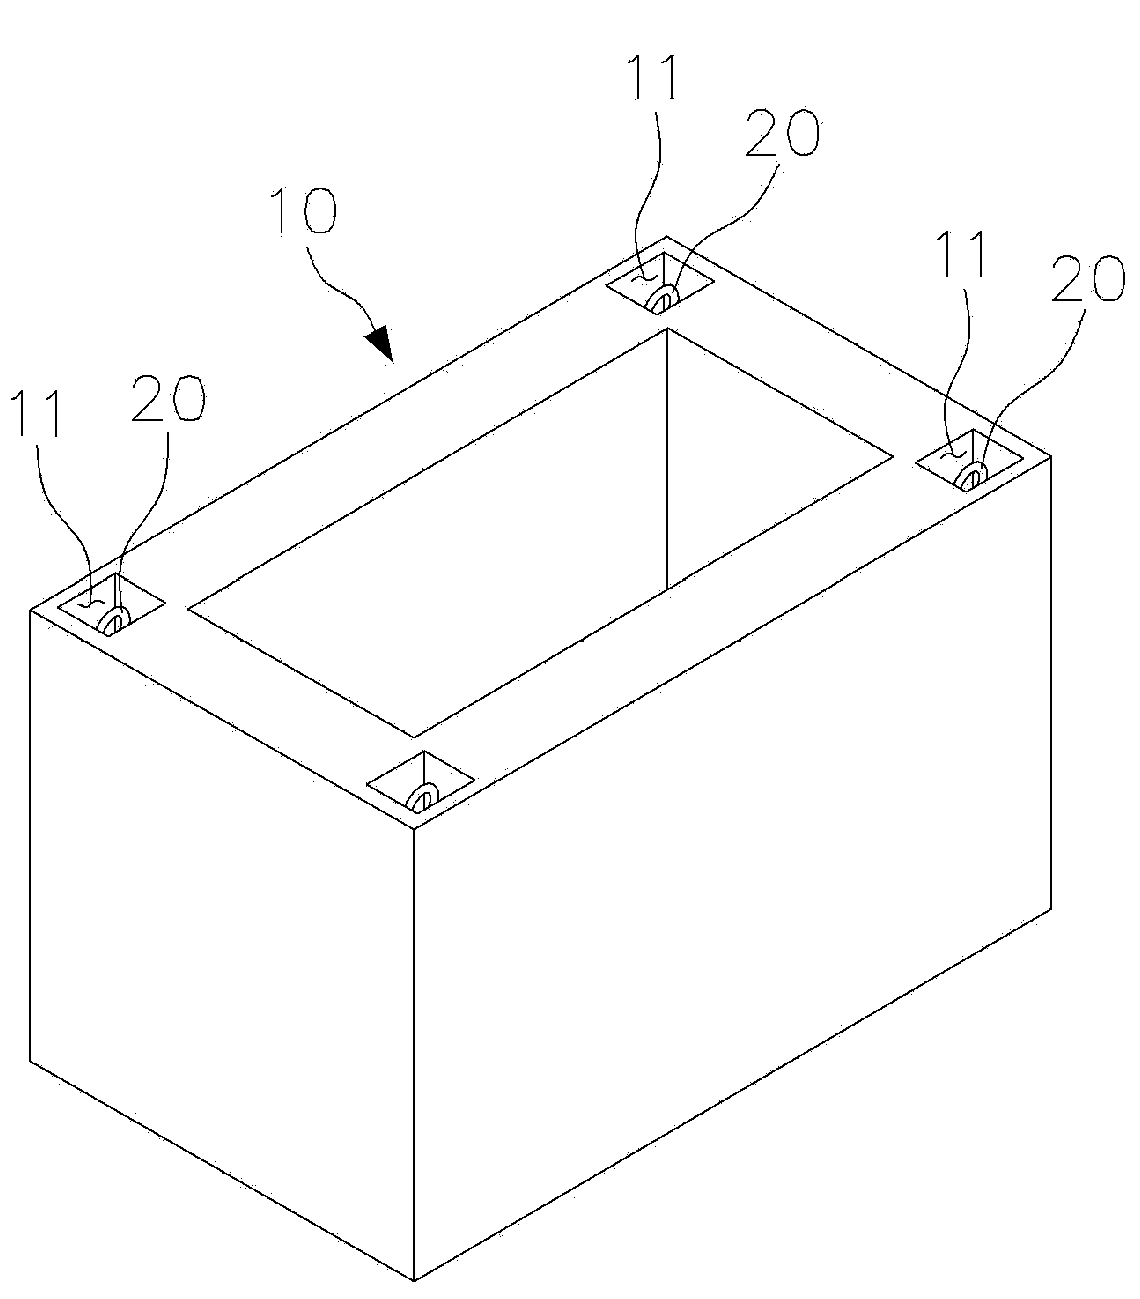 Large concrete block for lifting a crane, method for manufacturing same, and method for installing same